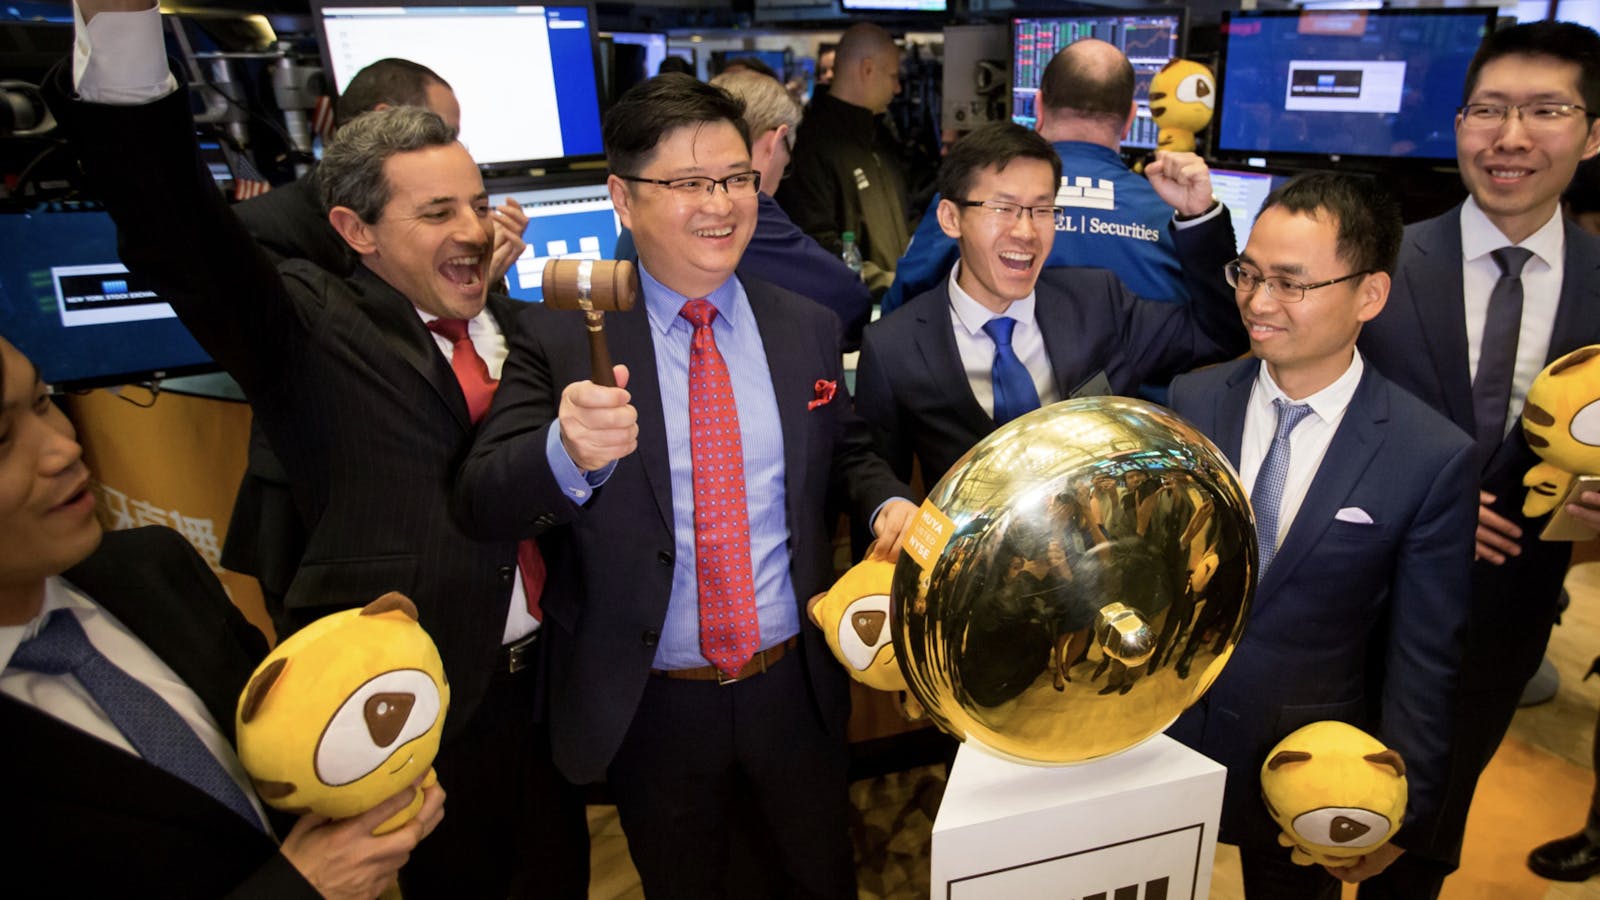 YY CEO Li Xueling, holding the hammer,  at the New York Stock Exchange last year when YY's subsidiary Huya went public. Photo by Bloomberg